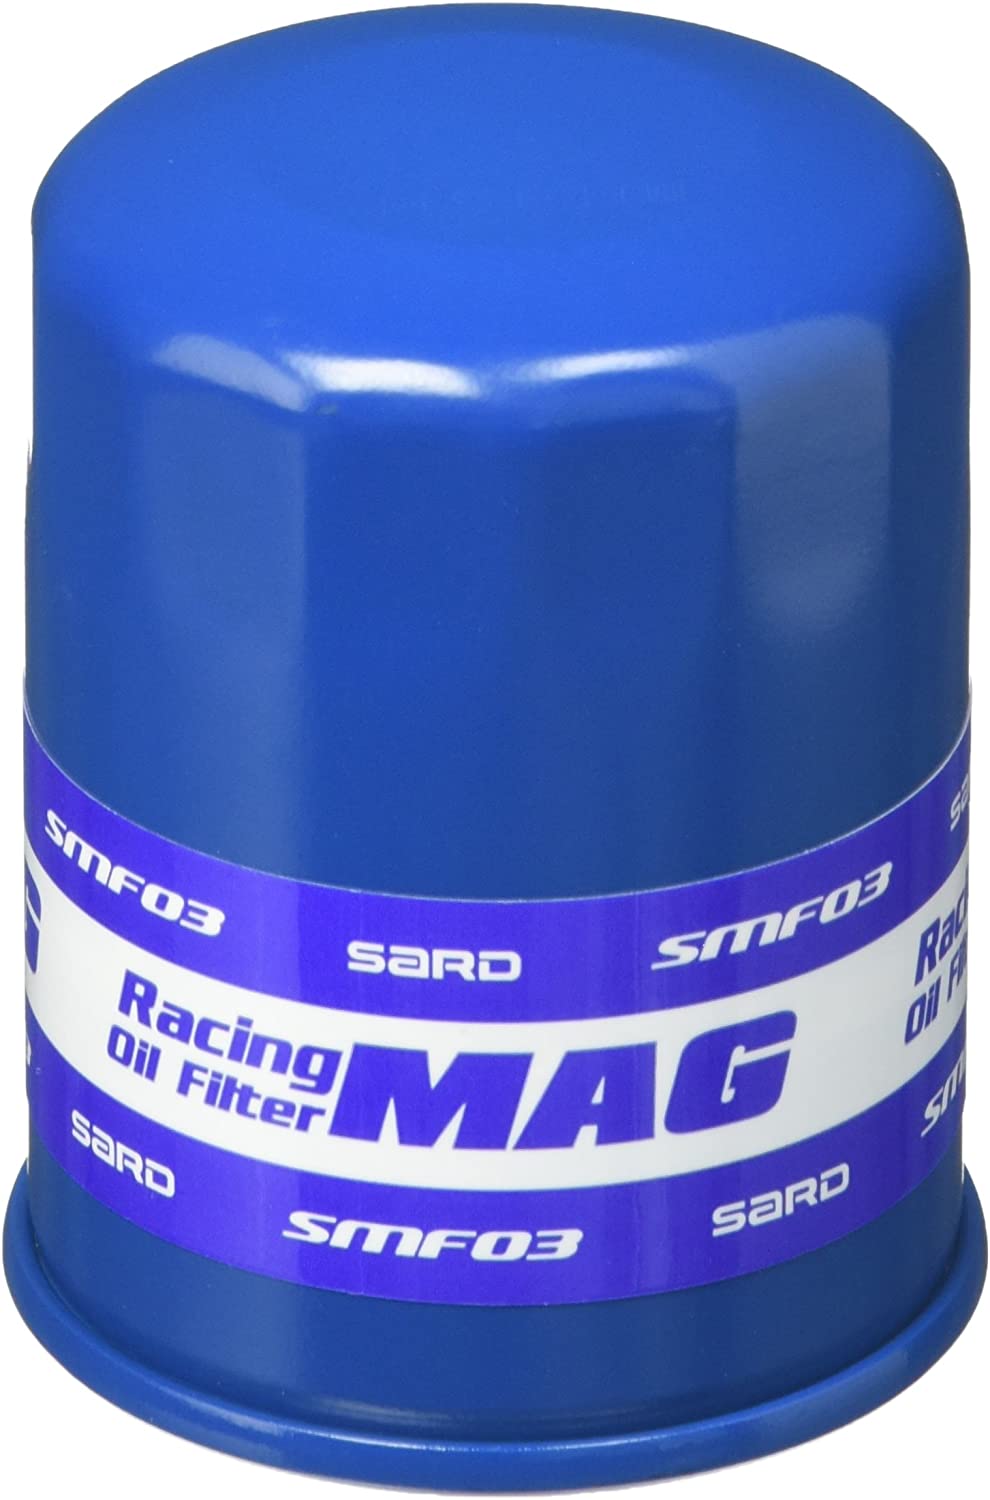 SARD RACING OIL FILTER For ESTIMA TCR10 TCR20 SMF04